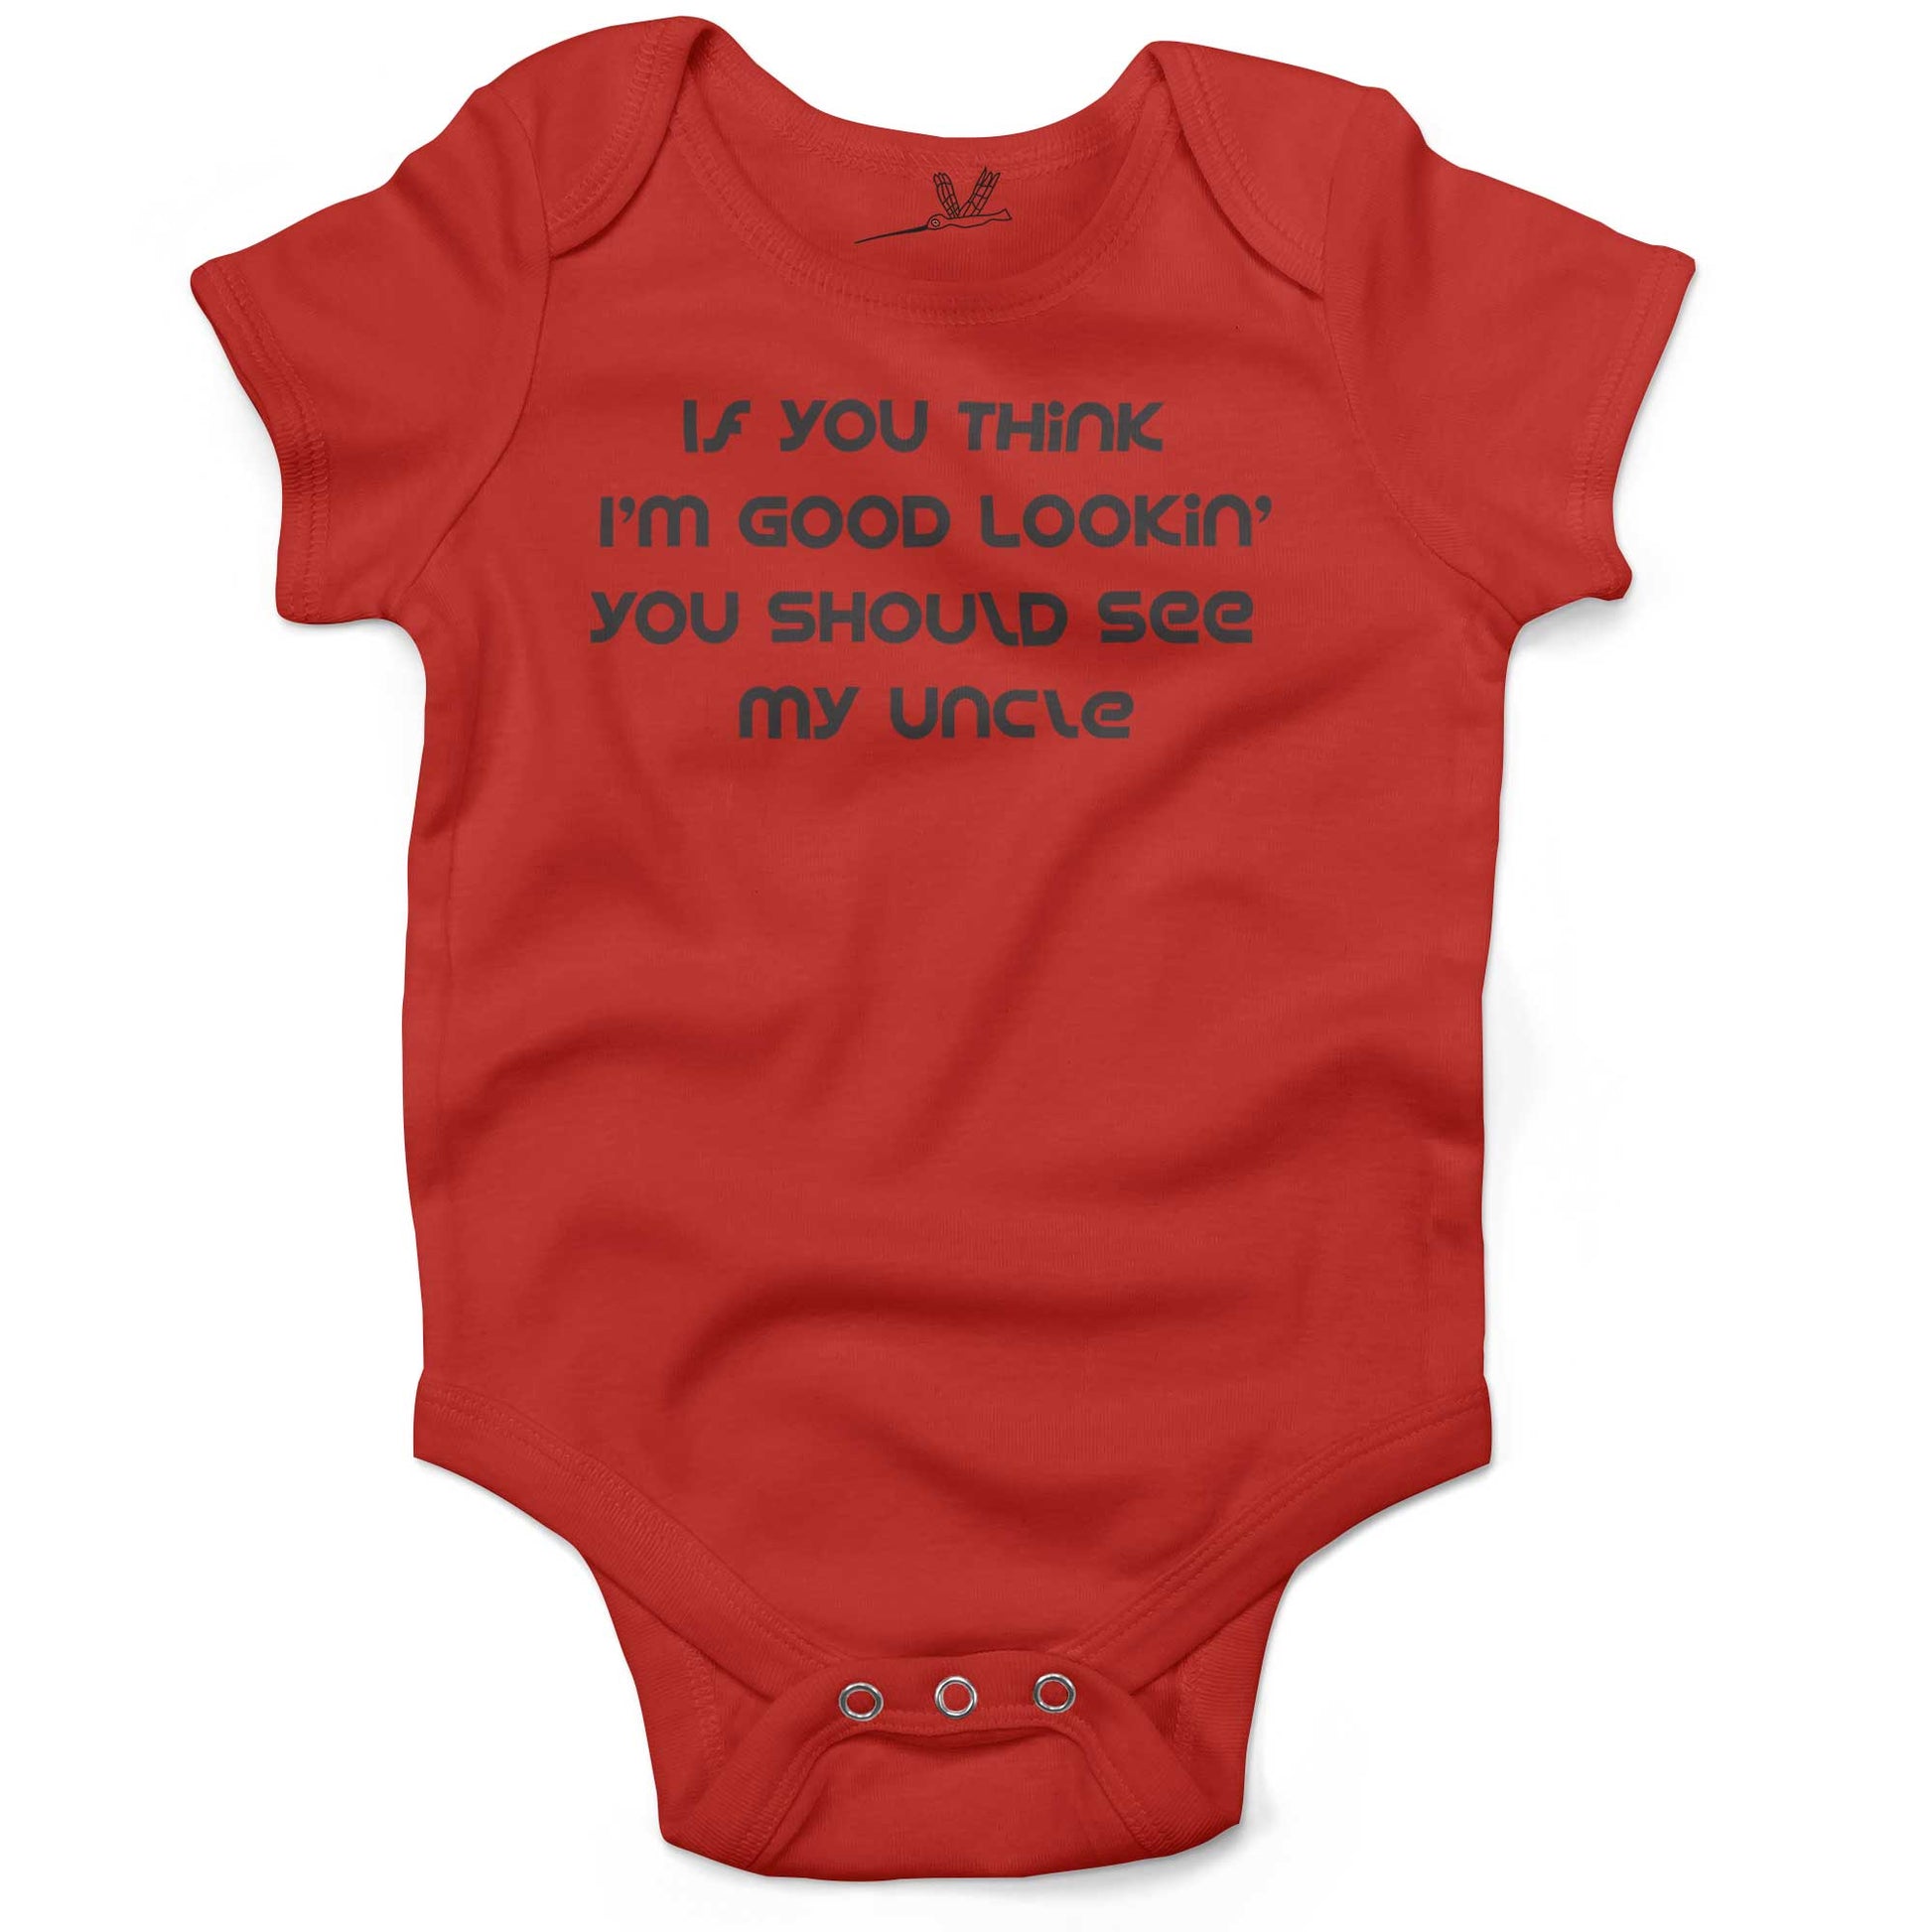 If You Think I'm Good Lookin' You Should See My Uncle Infant Bodysuit or Raglan Tee-Organic Red-3-6 months